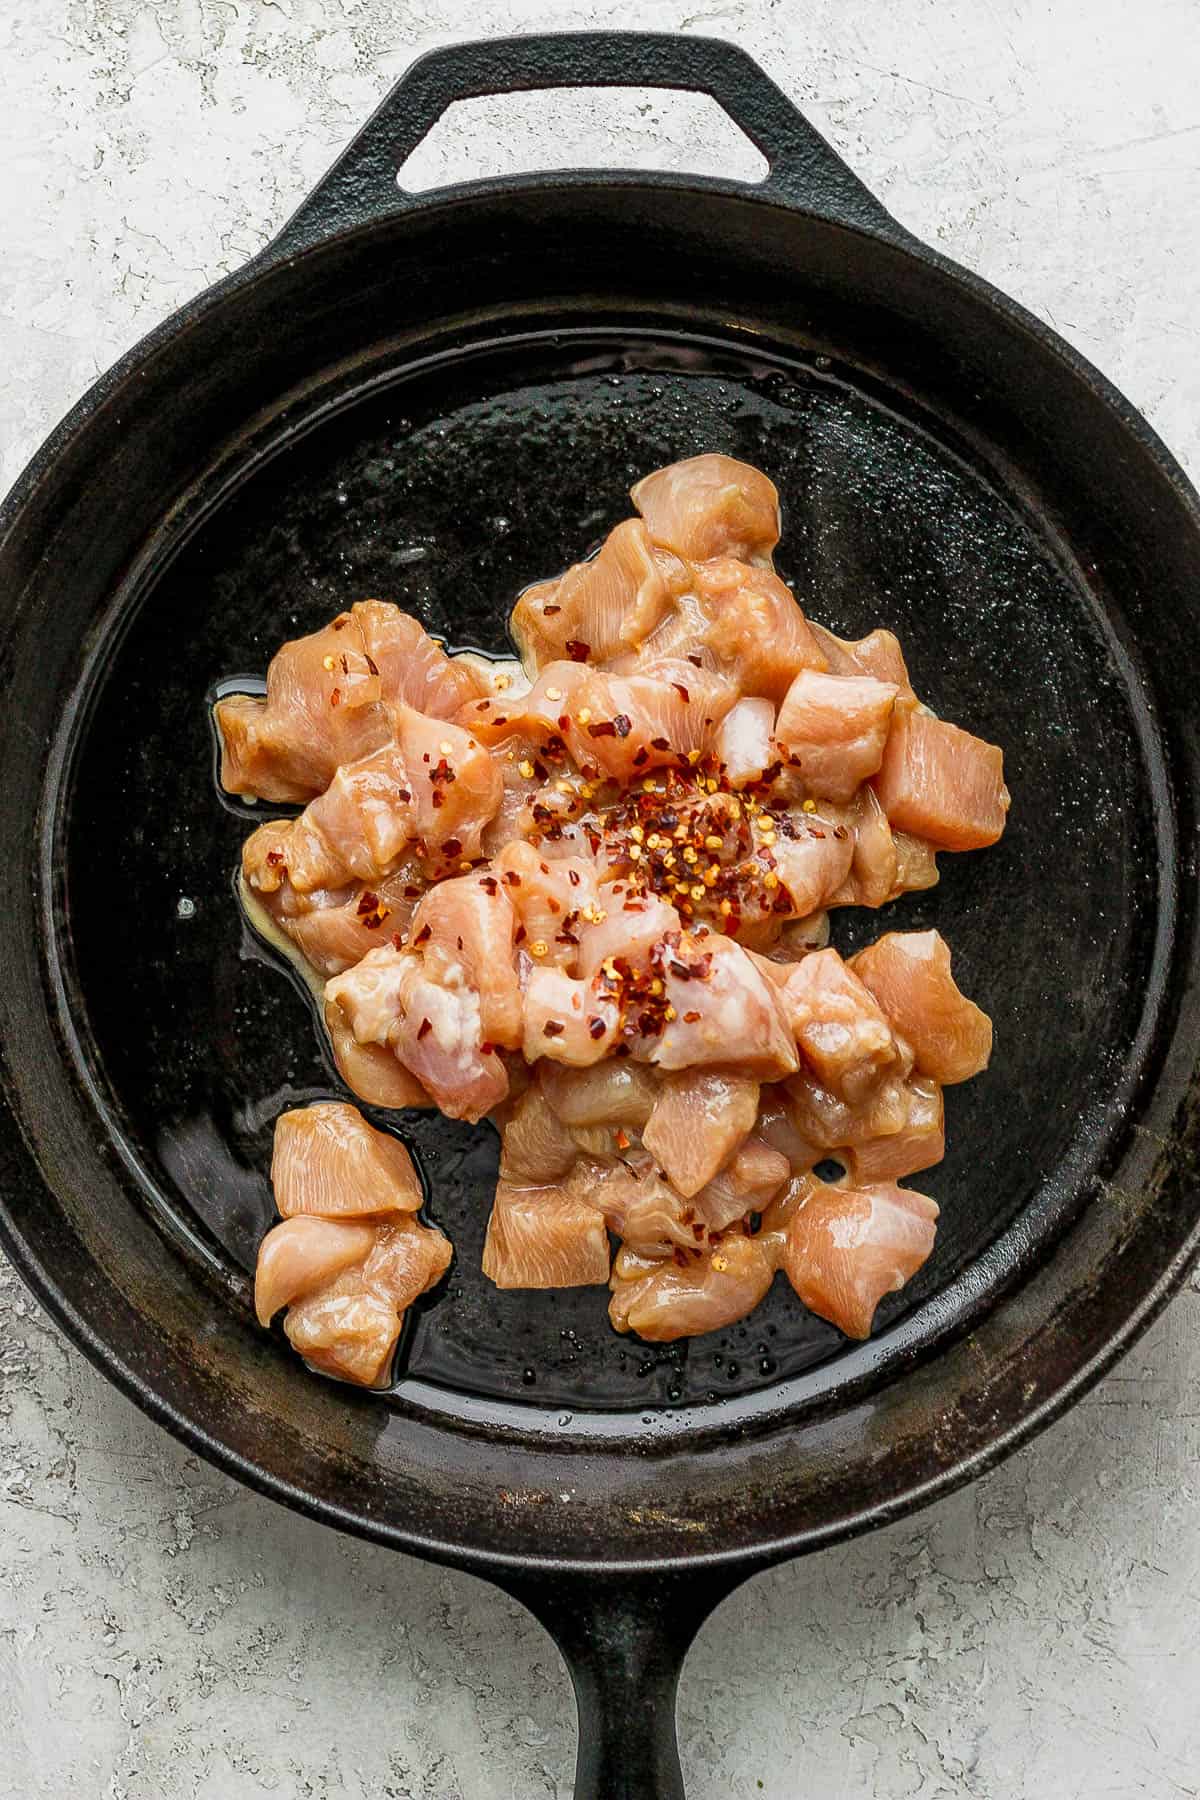 Marinated chicken added to a cast iron skillet with red pepper flakes.